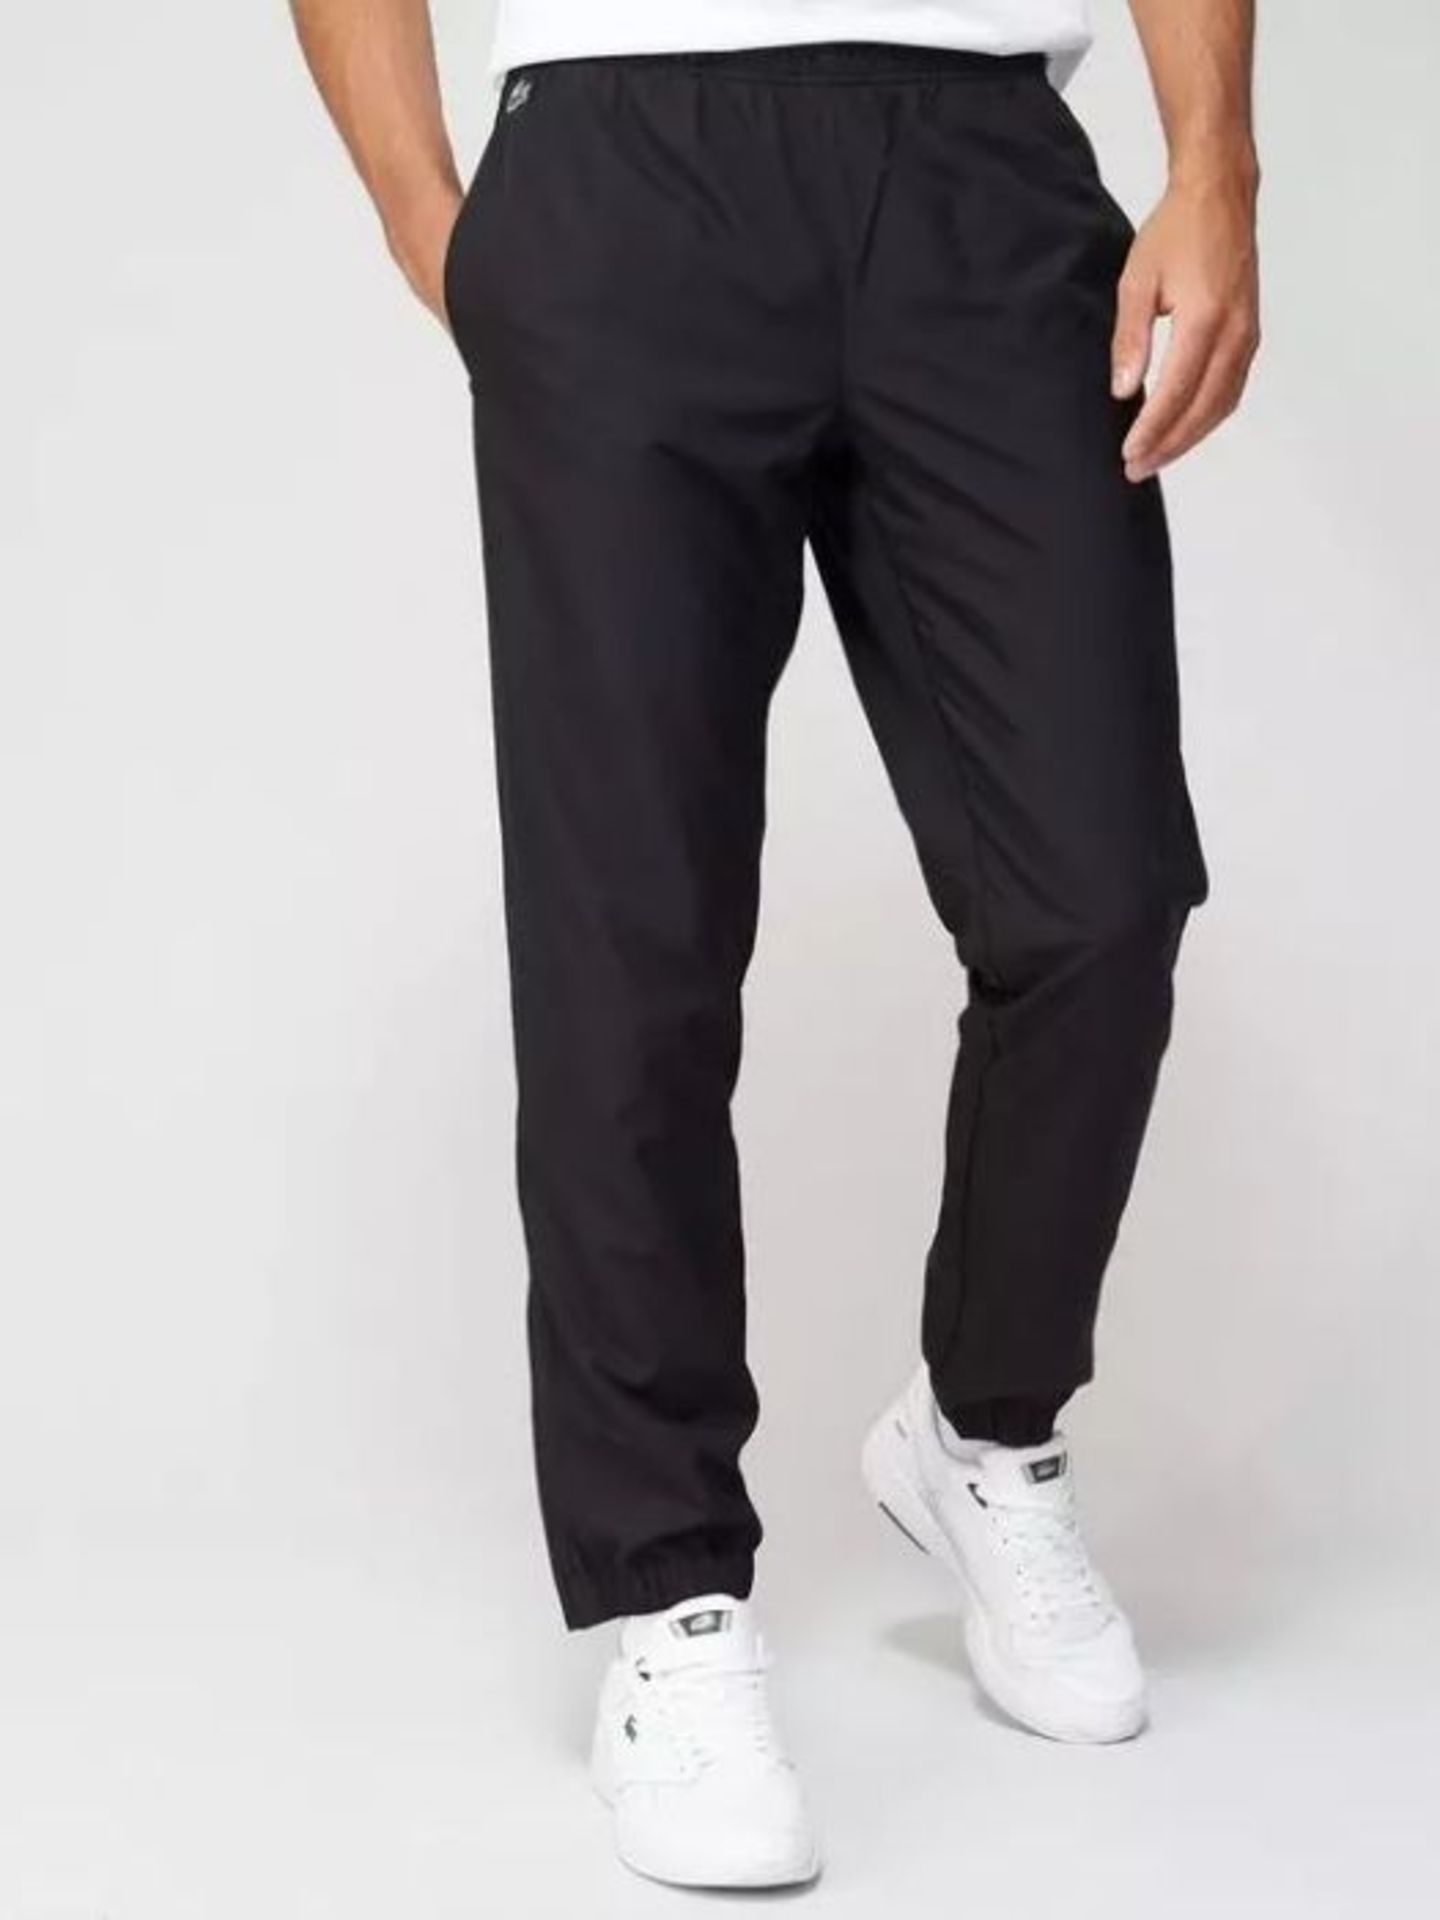 1 X LACOSTE TAPED DETAIL JOGGERS - BLACK / SIZE: 2XL / RRP £100.00 / GRADE B, SLIGHT DAMAGE TO